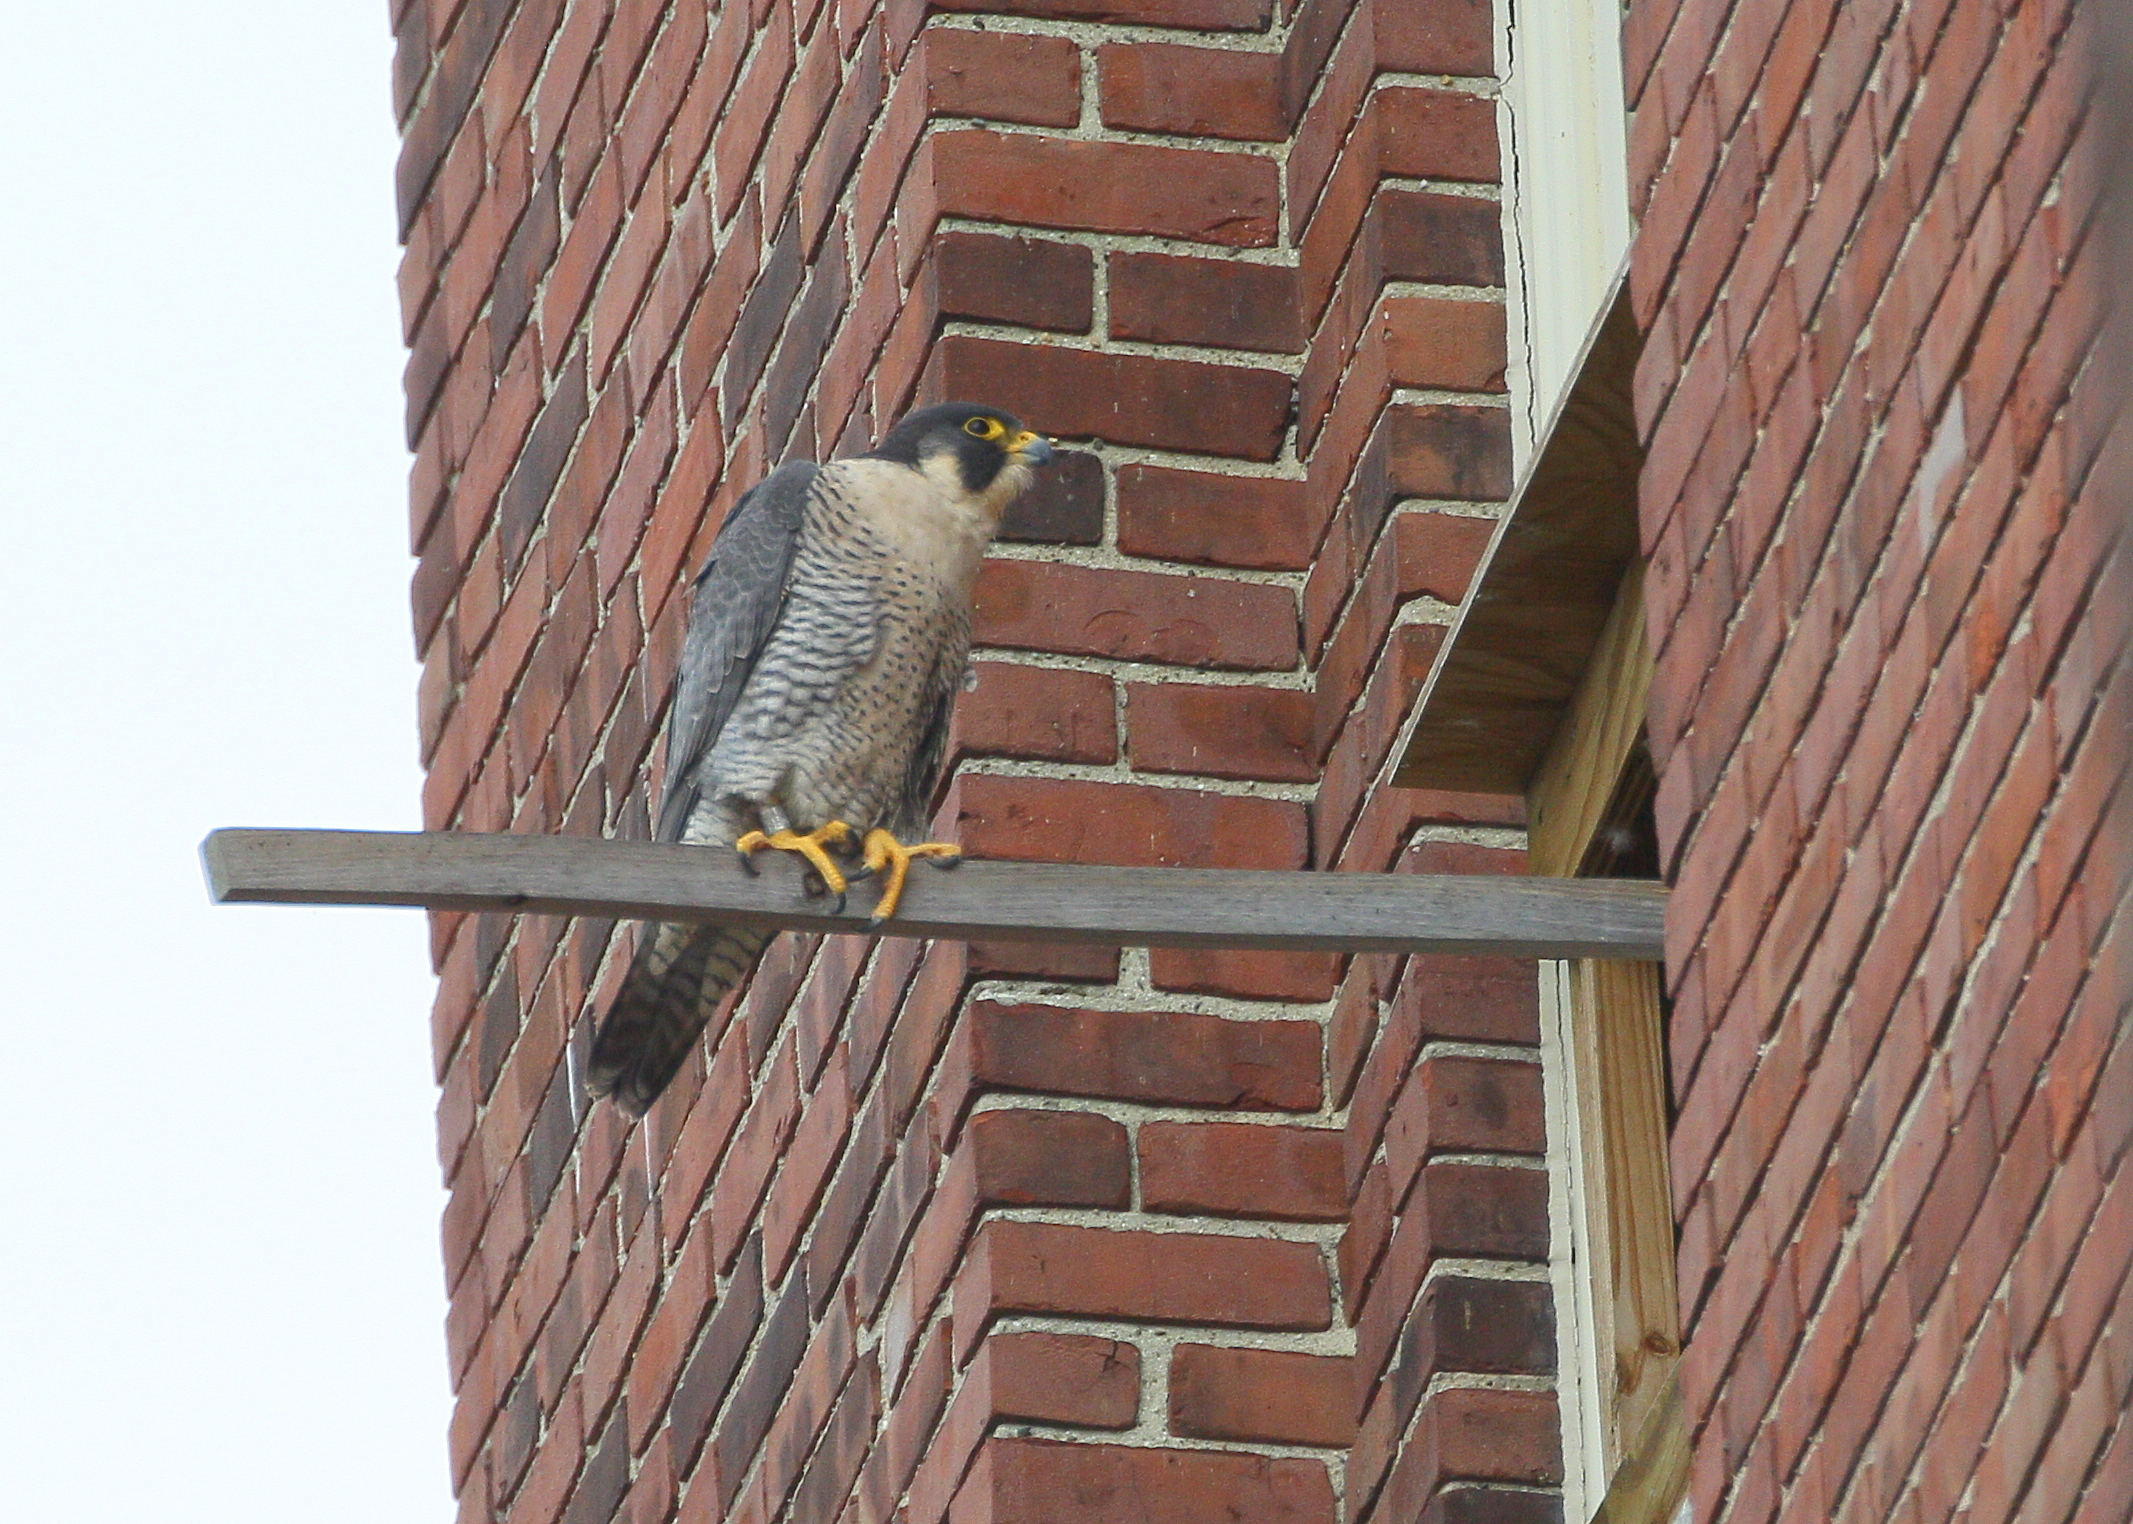 Peregrine: on the perch